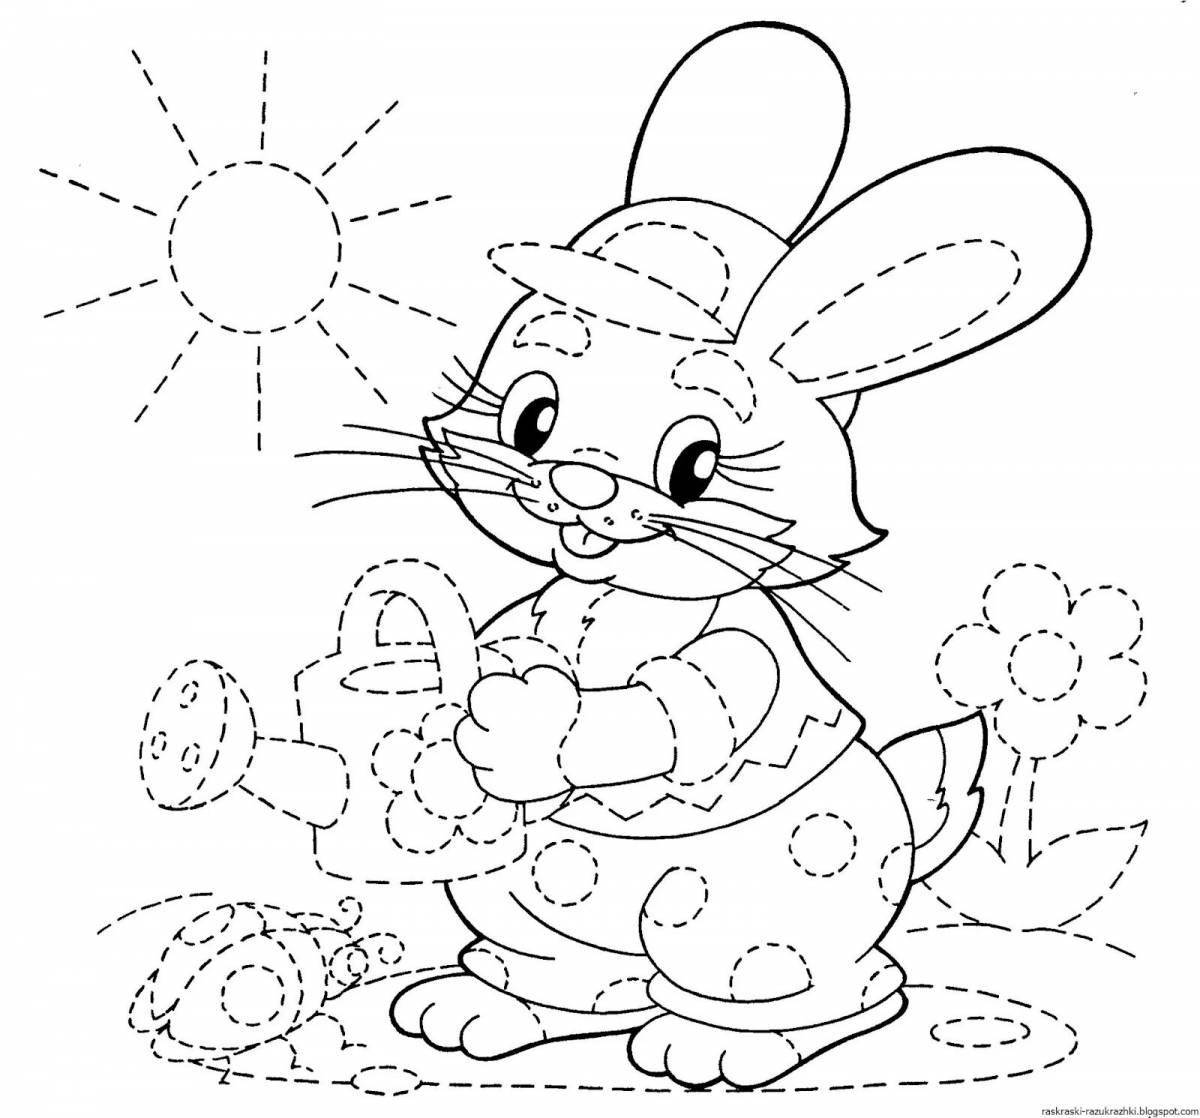 Charming educational coloring book for girls 5-6 years old